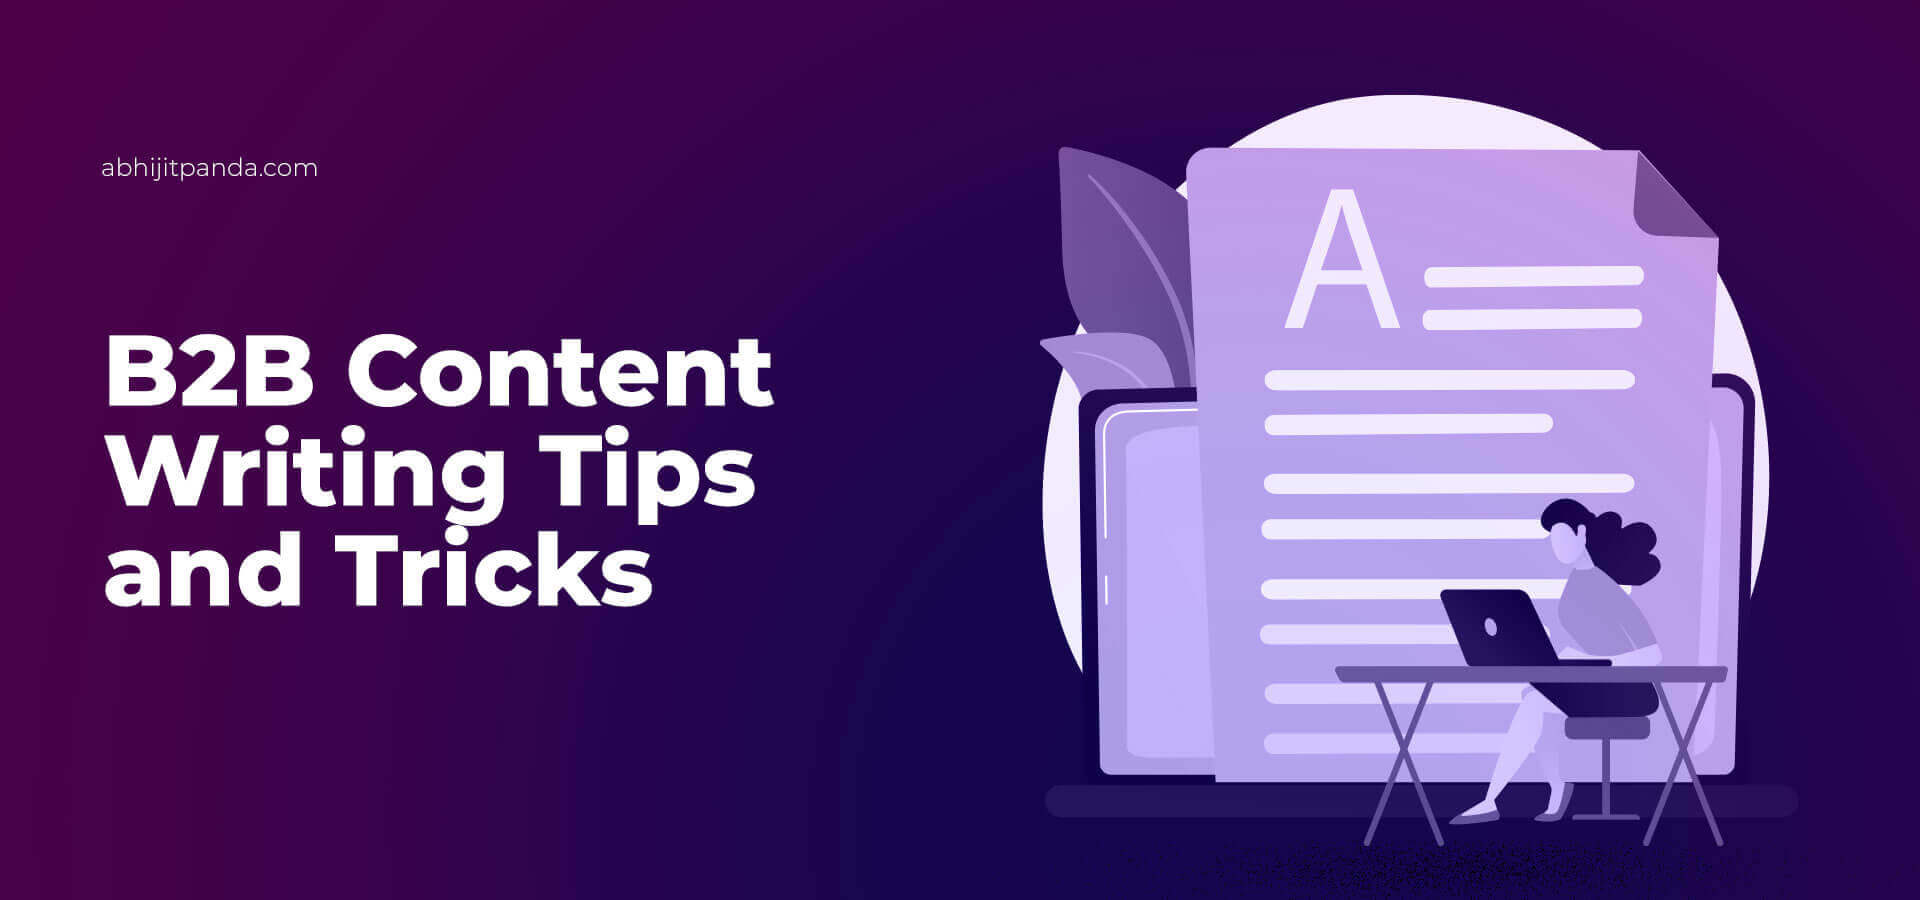 B2B Content Writing Tips and Tricks